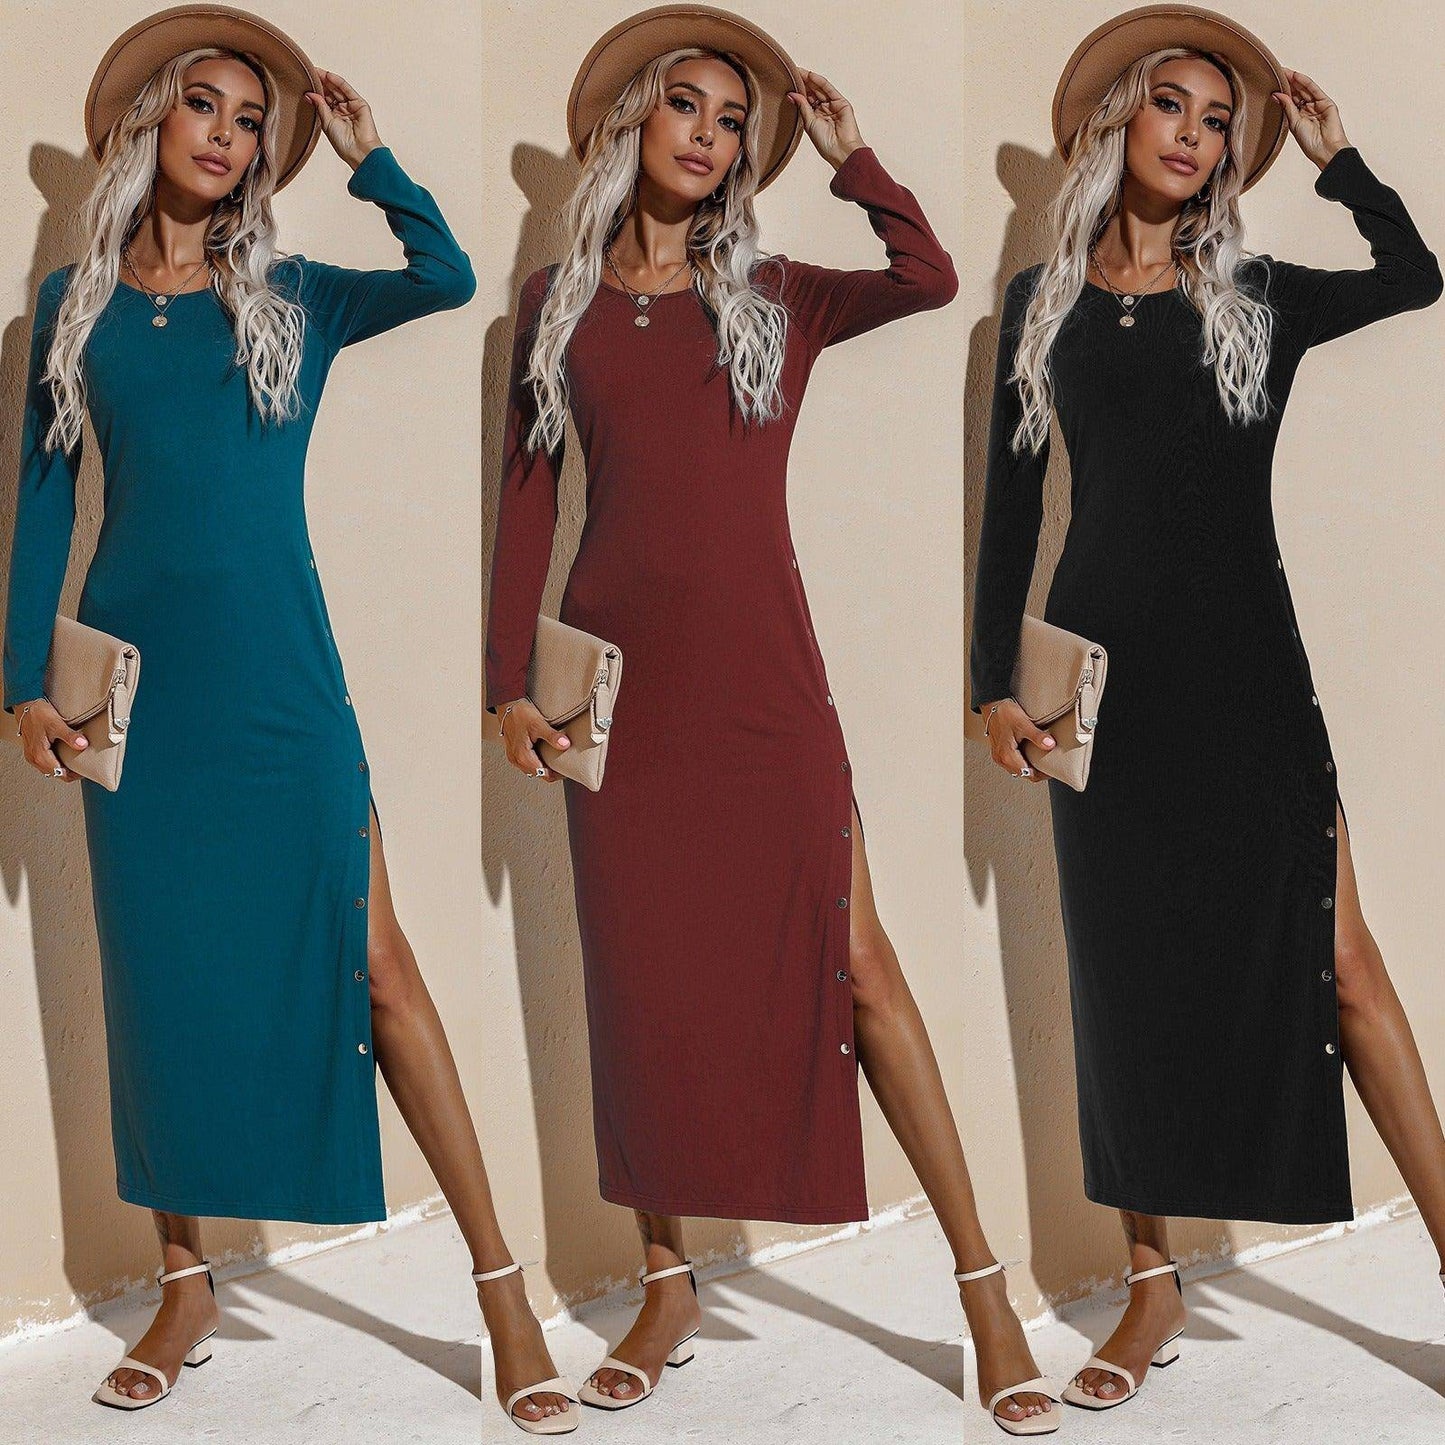 Charlotte Women's Solid Color Long-Sleeved Thin Long Dress